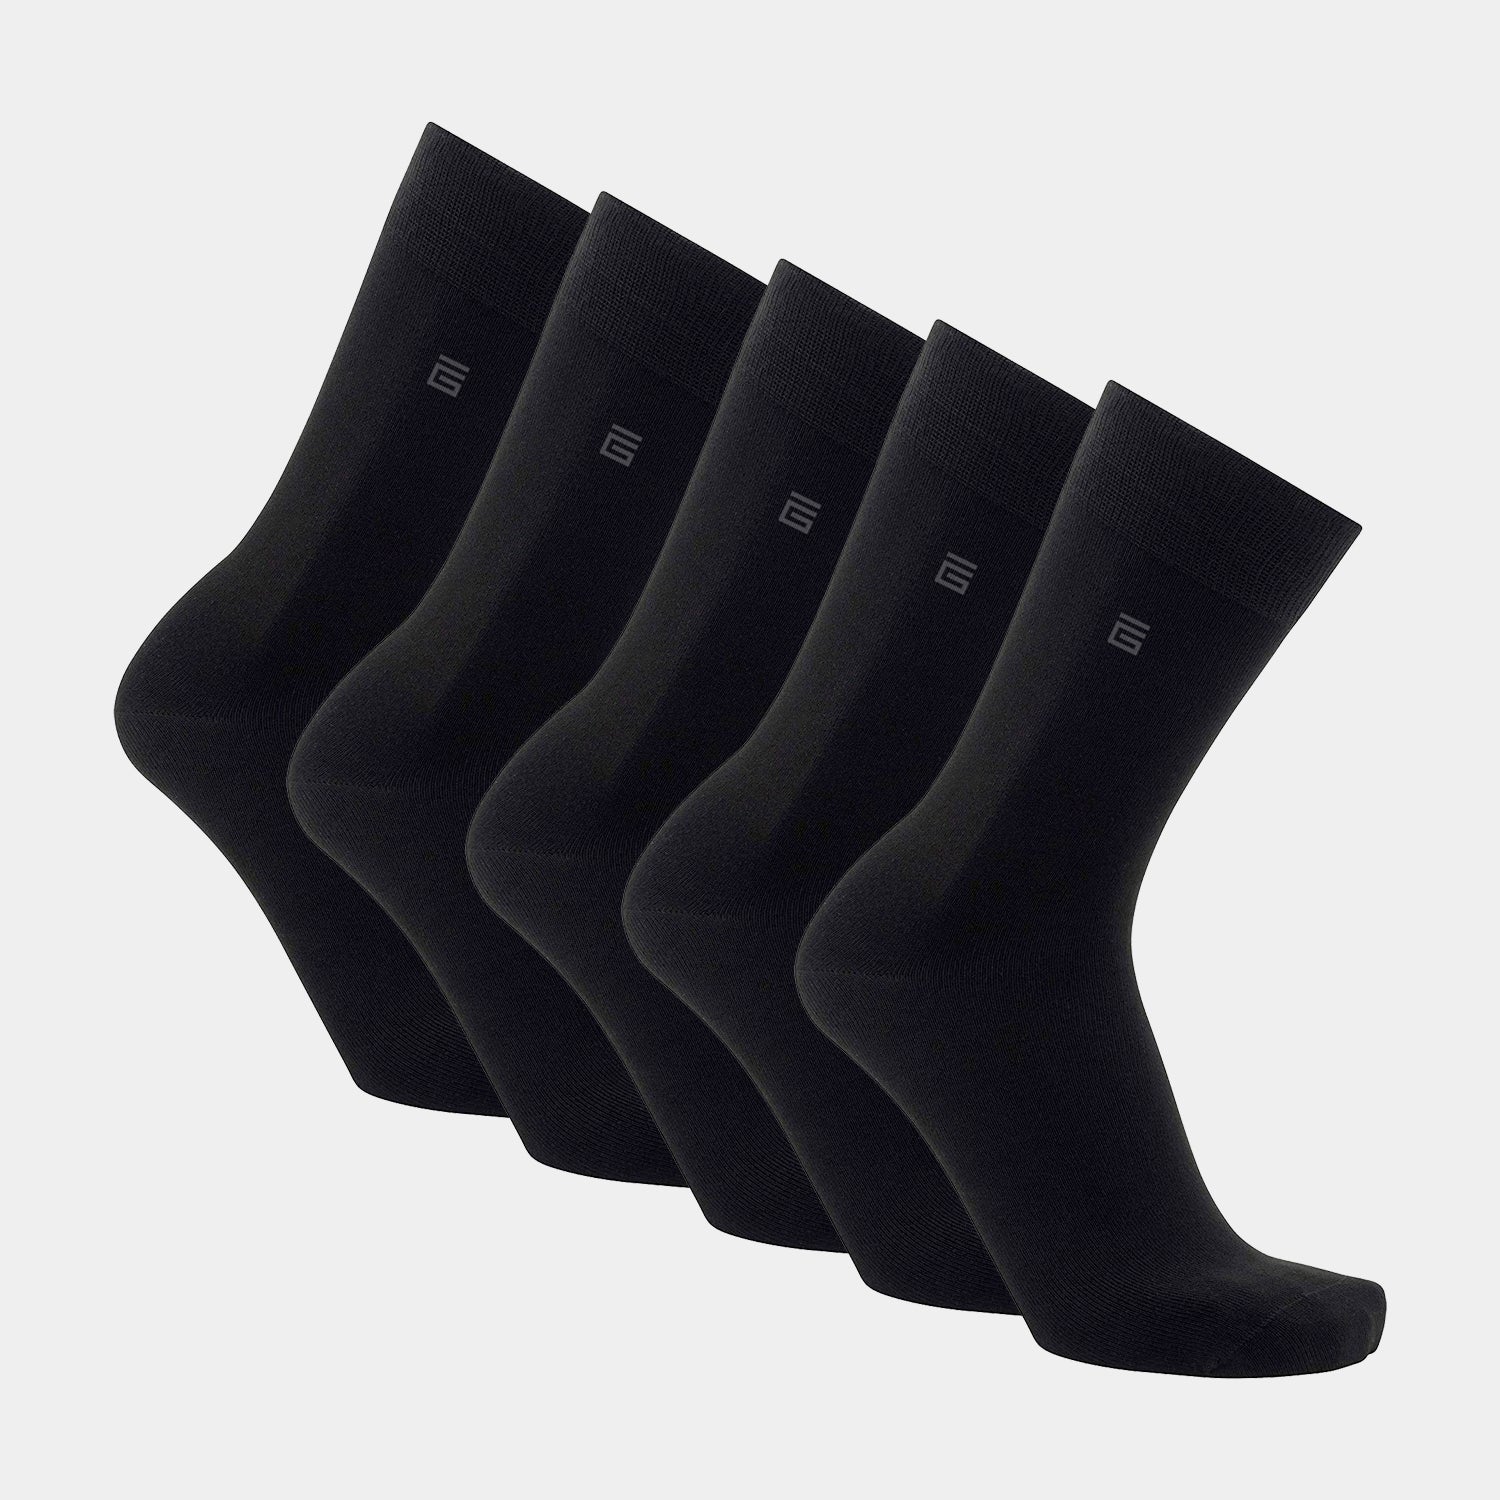 The Bamboo Mid-Calf Sock - 5 Pack